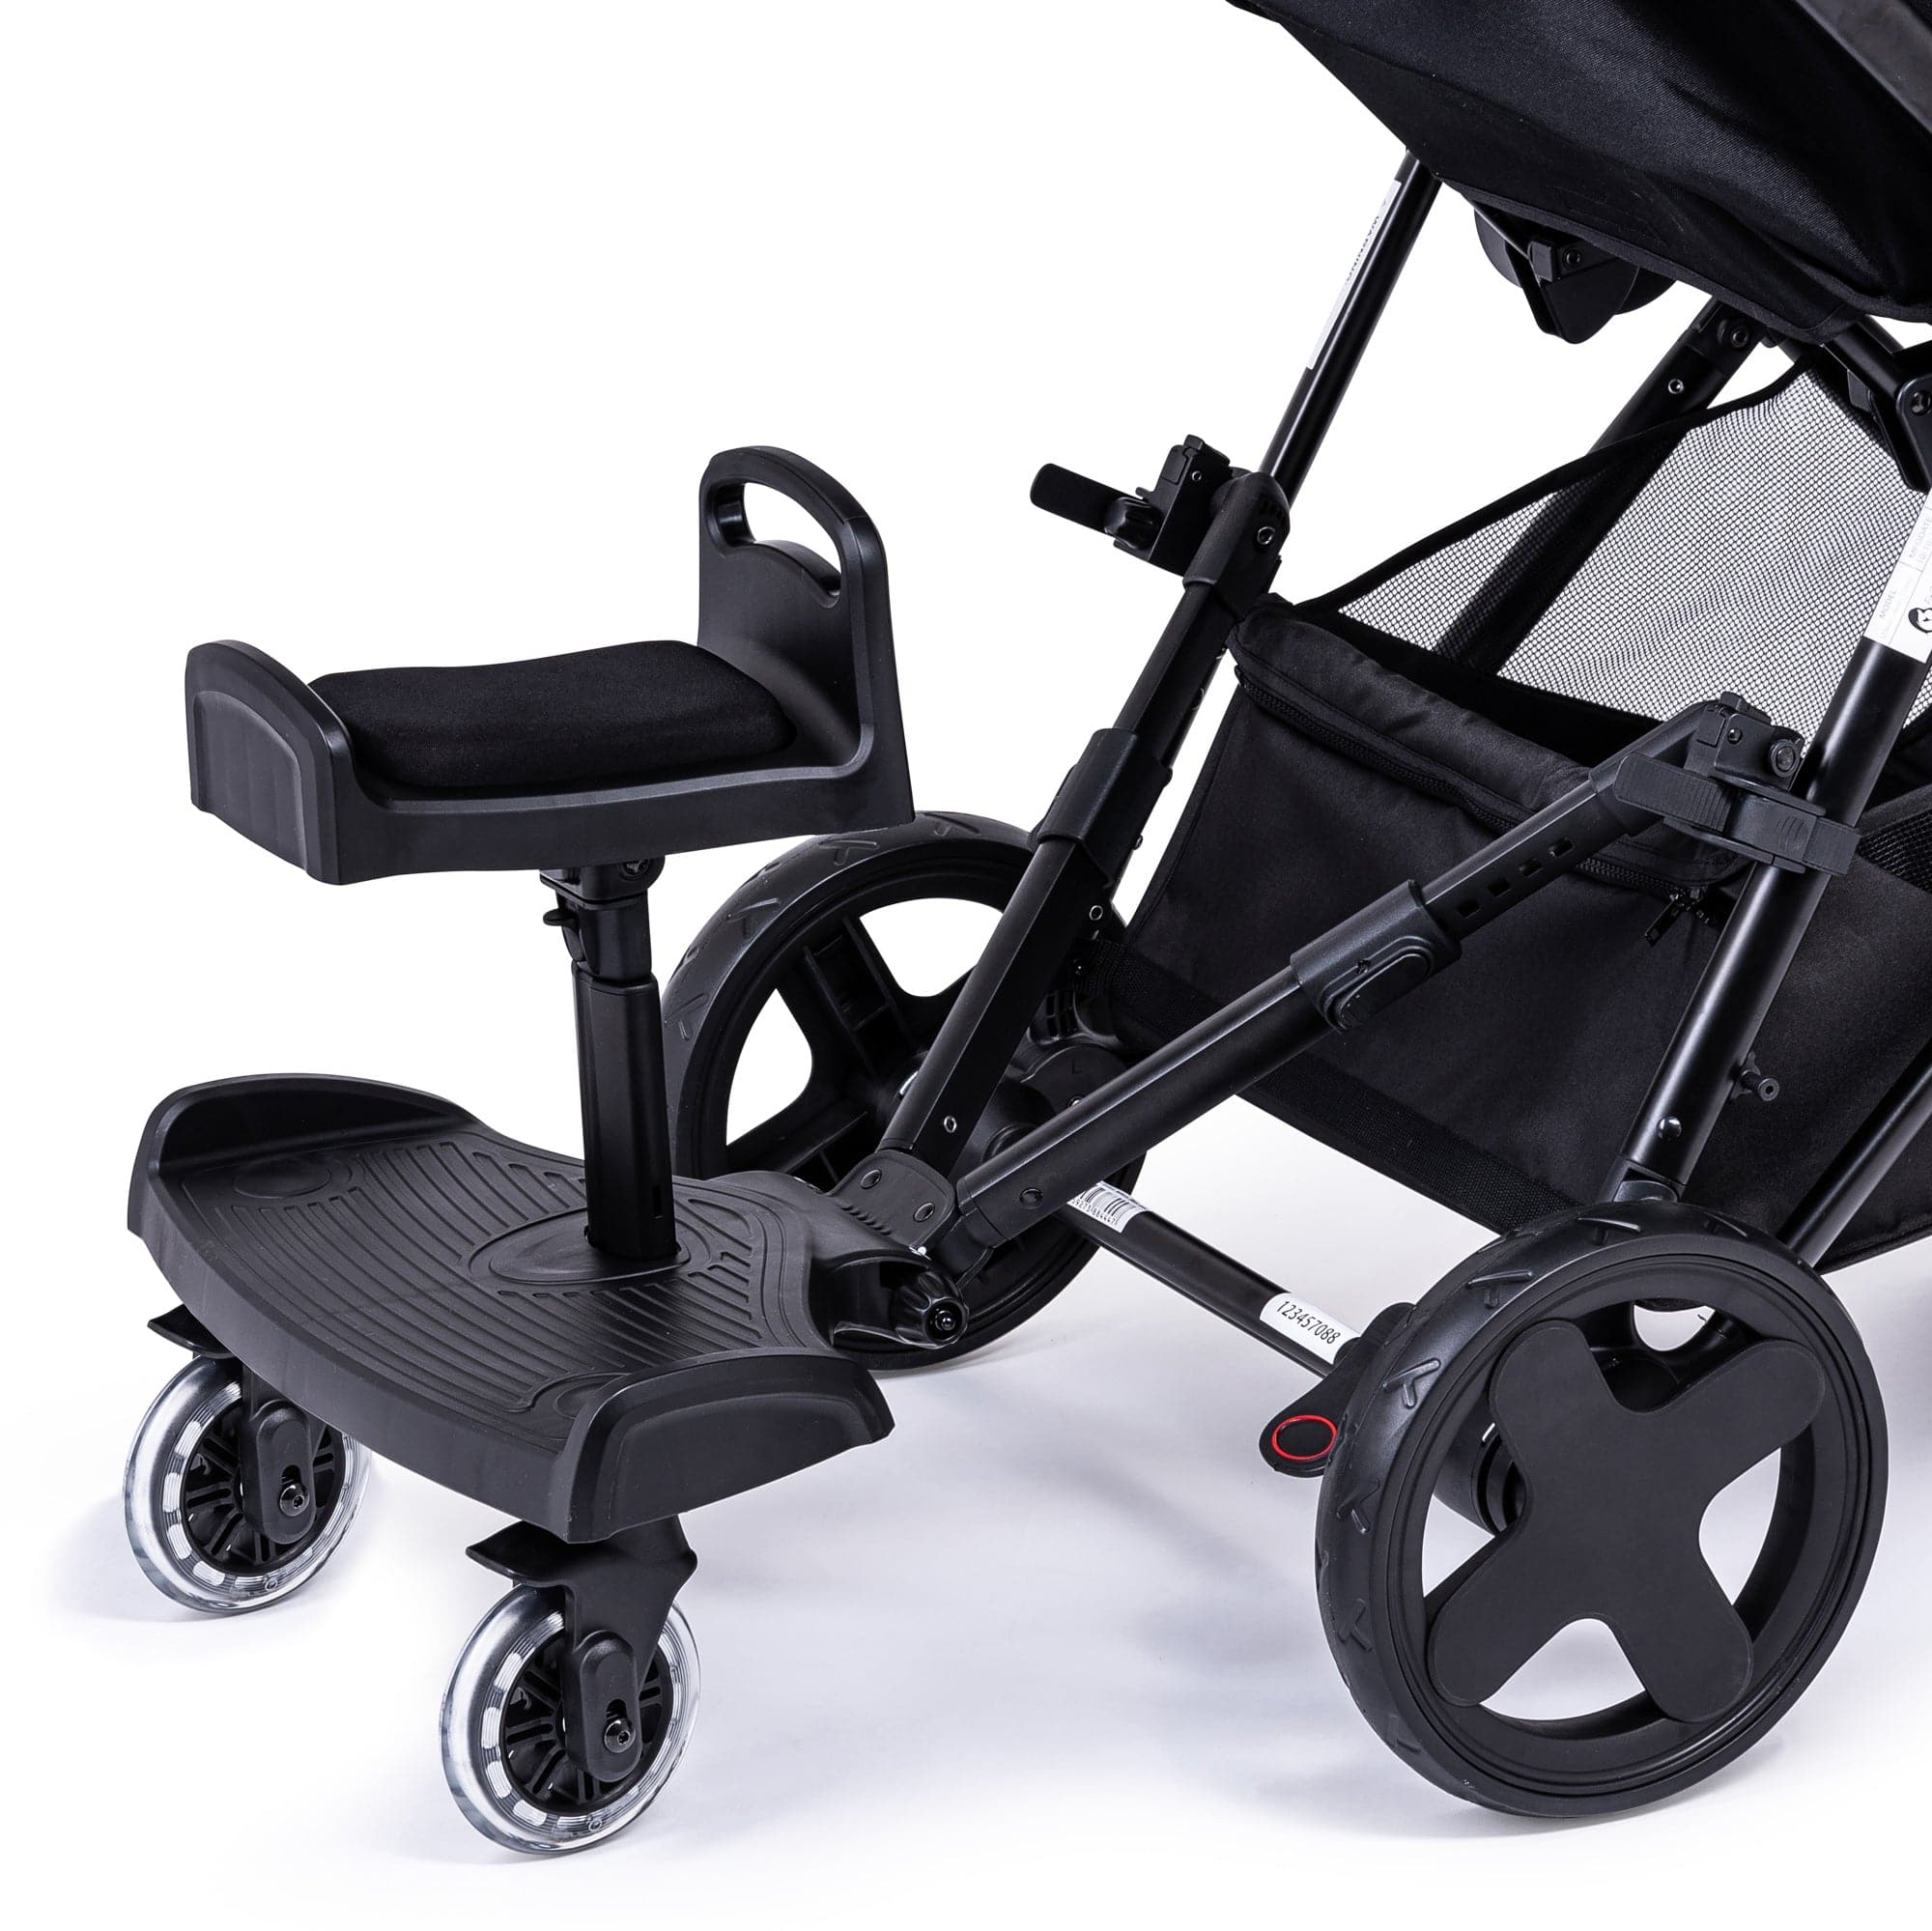 Ride On Board with Seat Compatible with Hybrid - For Your Little One